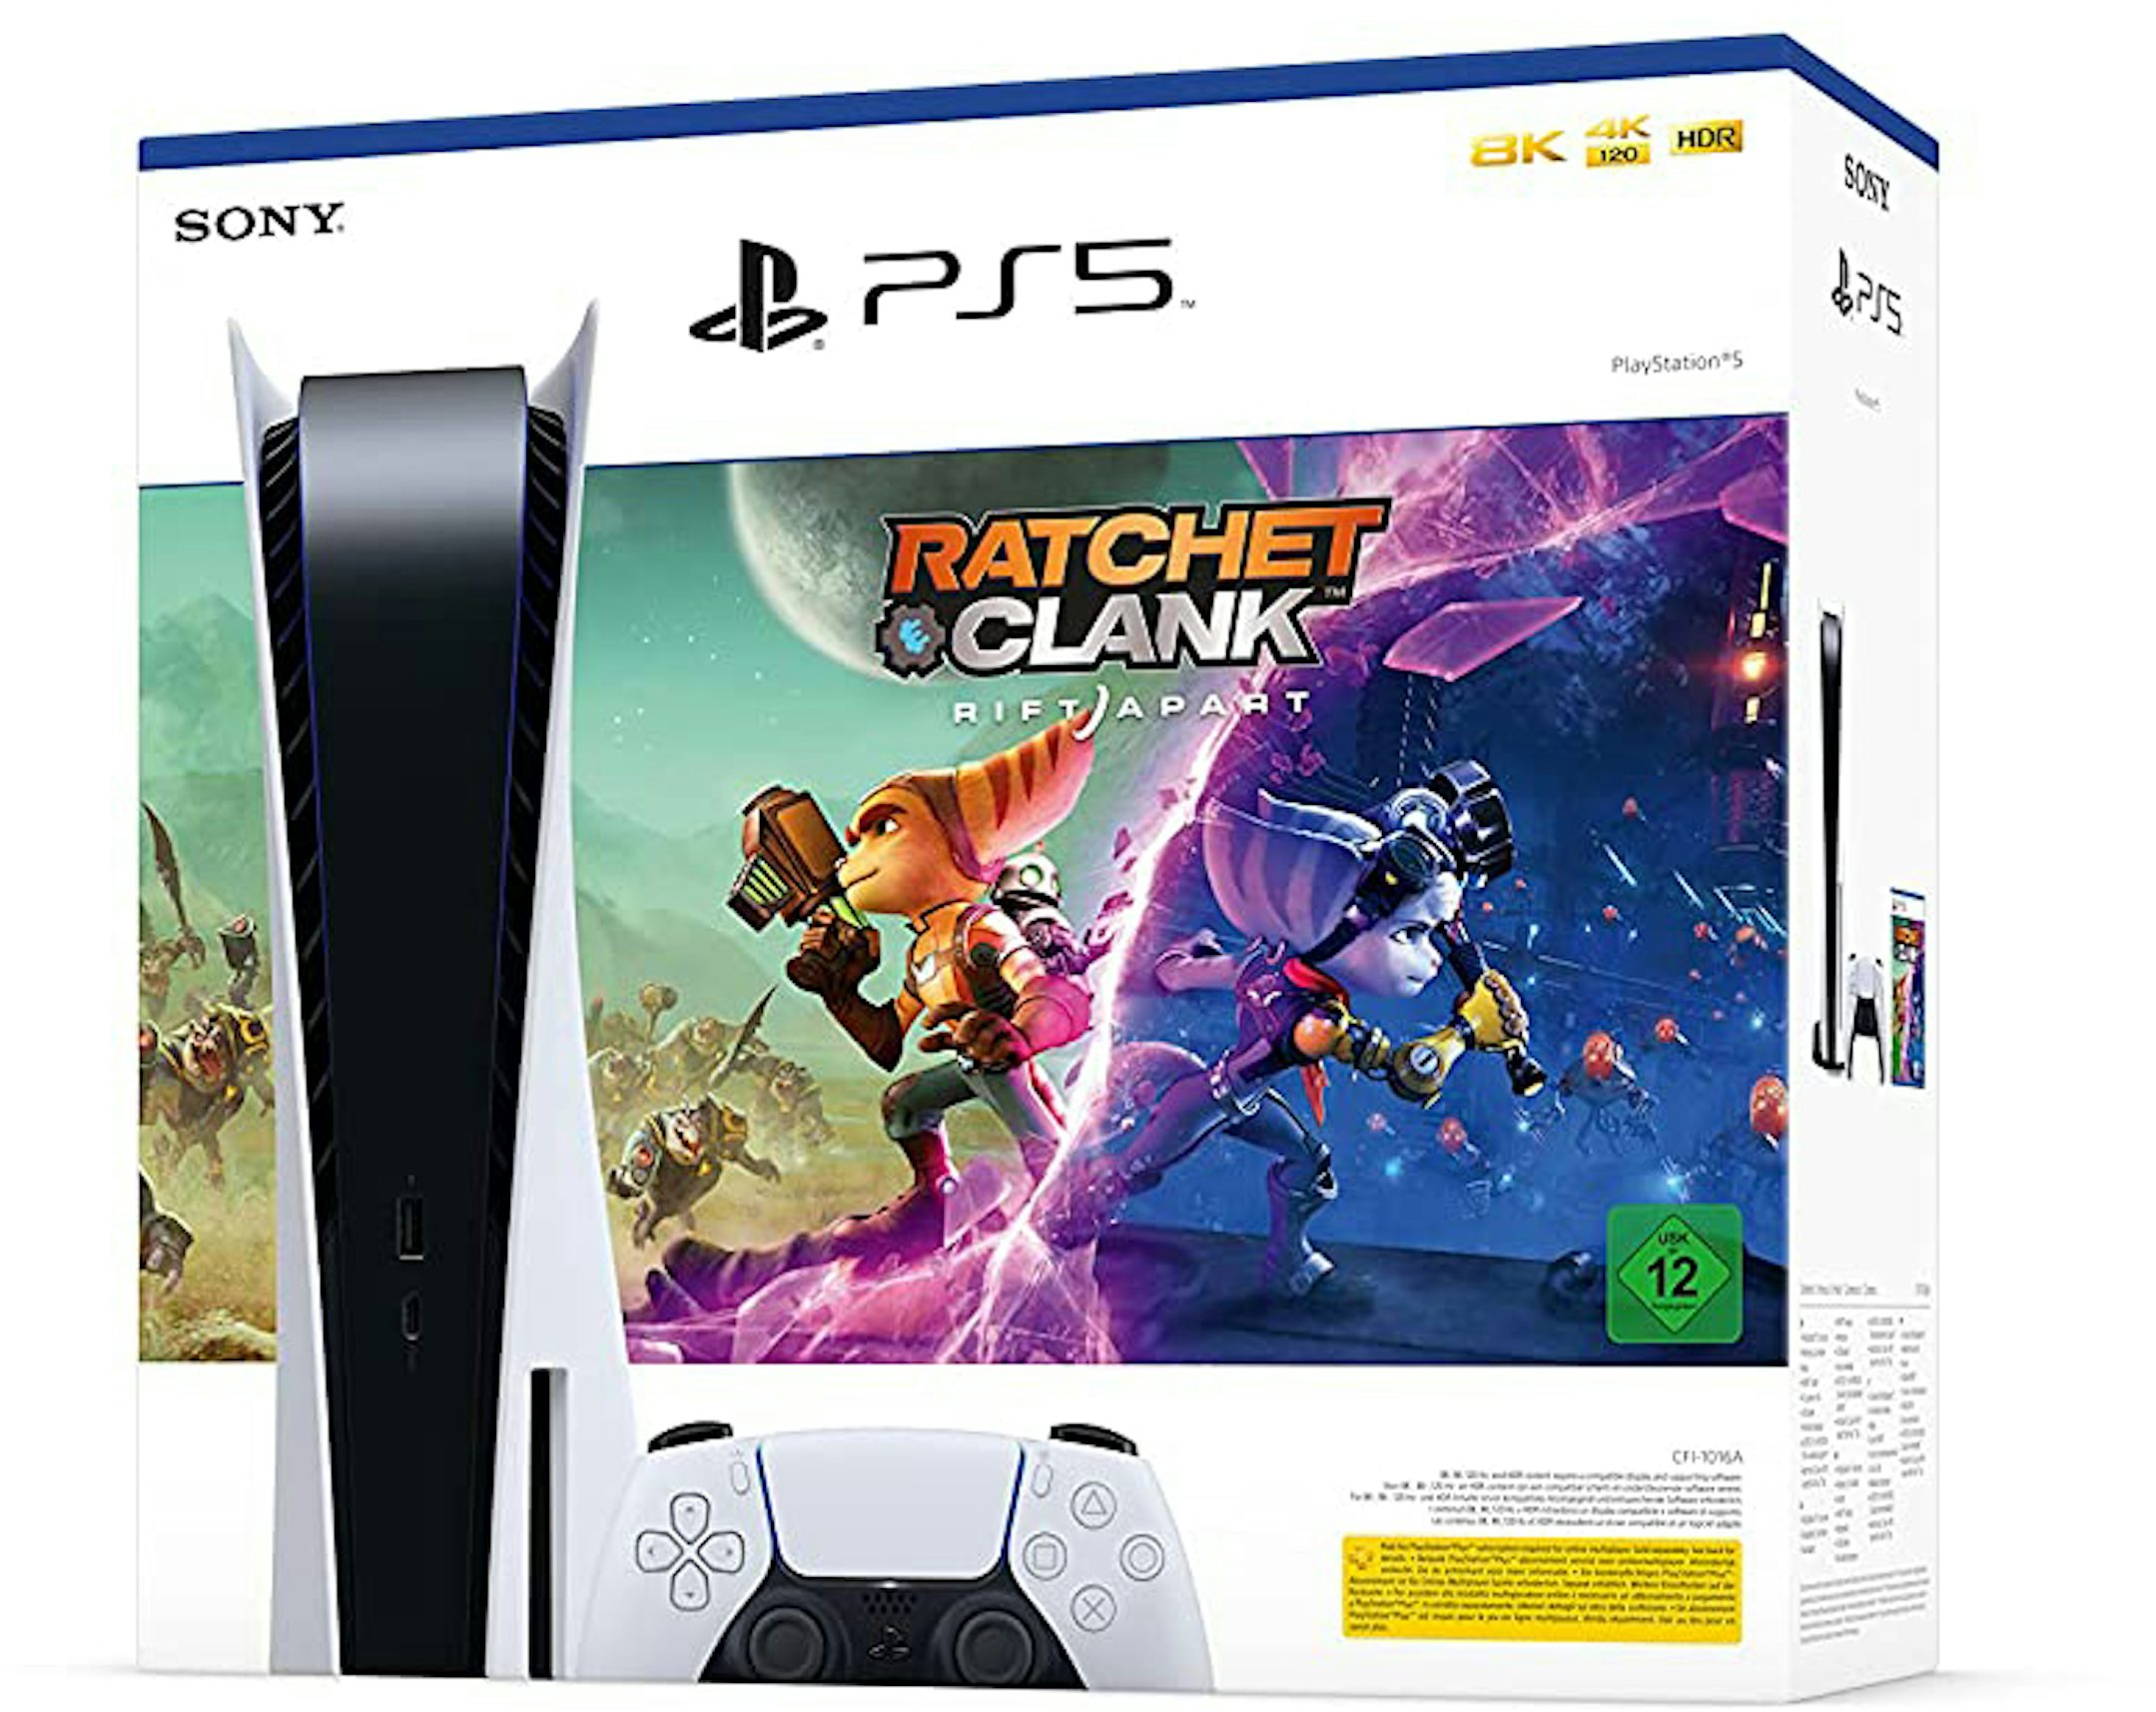 Sony Sony Playstation 5 PS5 Disc Console with Extra DualSense Wireless  Controller Bundle (US Plug) 3005718-3006396/3006634 Glactic Purple - US